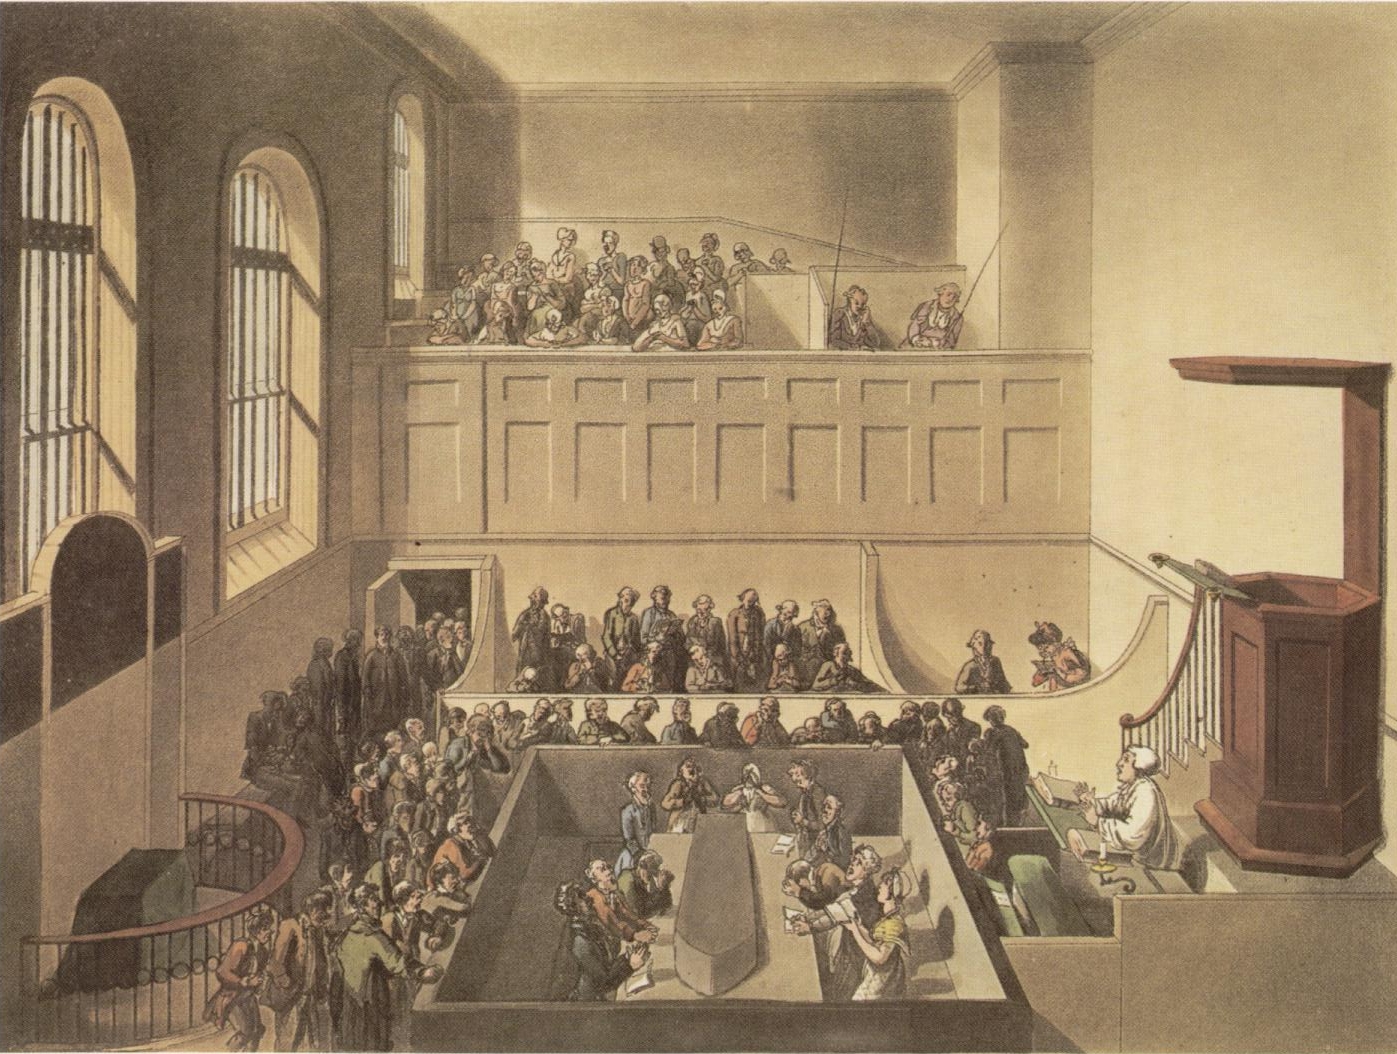 The interior of the chapel at Newgate Prison.  Prisoners awaiting execution can be seen praying around a coffin in the middle of the room.  The Ordinary of Newgate in a white surplice can be seen on the right giving a sermon, while other prisoners and visitors can be seen in the gallery at the back and entering from a door on the left.